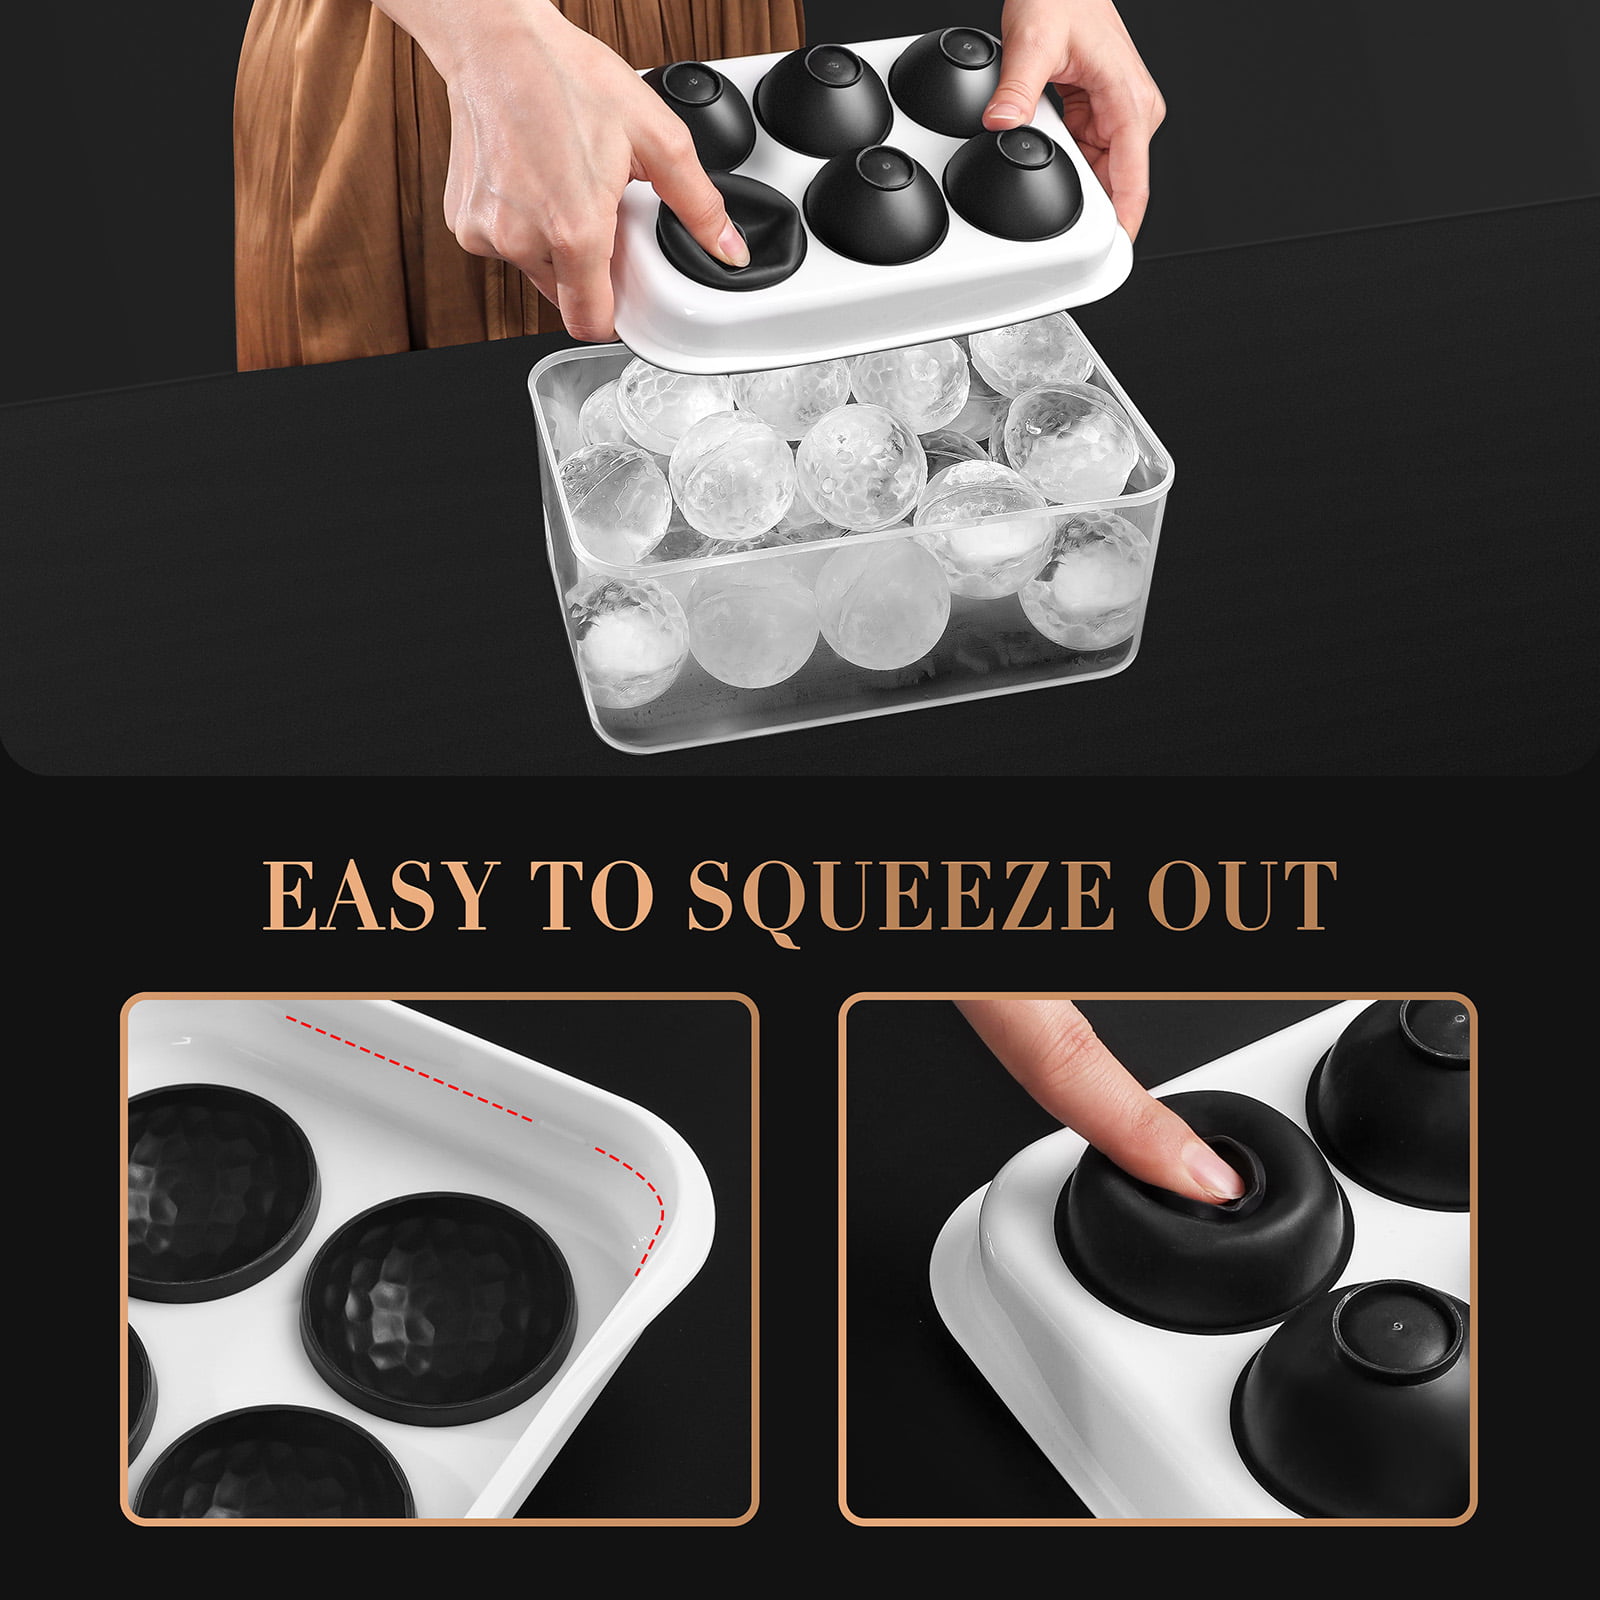 SKYCARPER Large Ice Cube Trays for Whiskey, 2 inch Flexible 4 Ice Balls Maker with Lids & Bonus Funnels, BPA Free Round Silicone Ice Cube Molds, Reusable Sphere